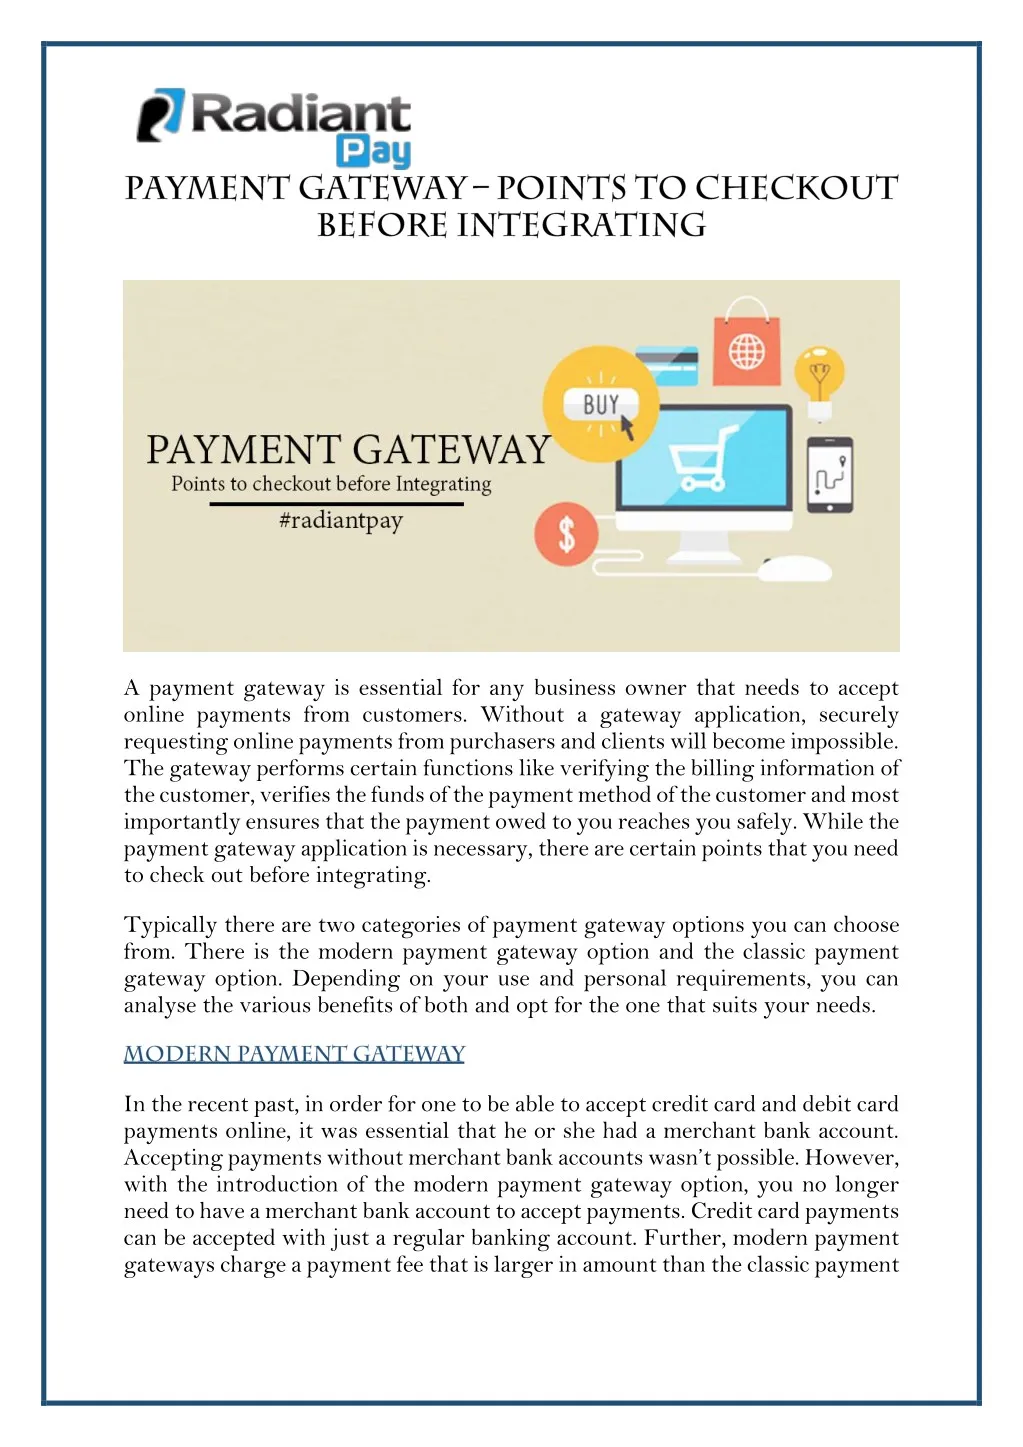 a payment gateway is essential for any business